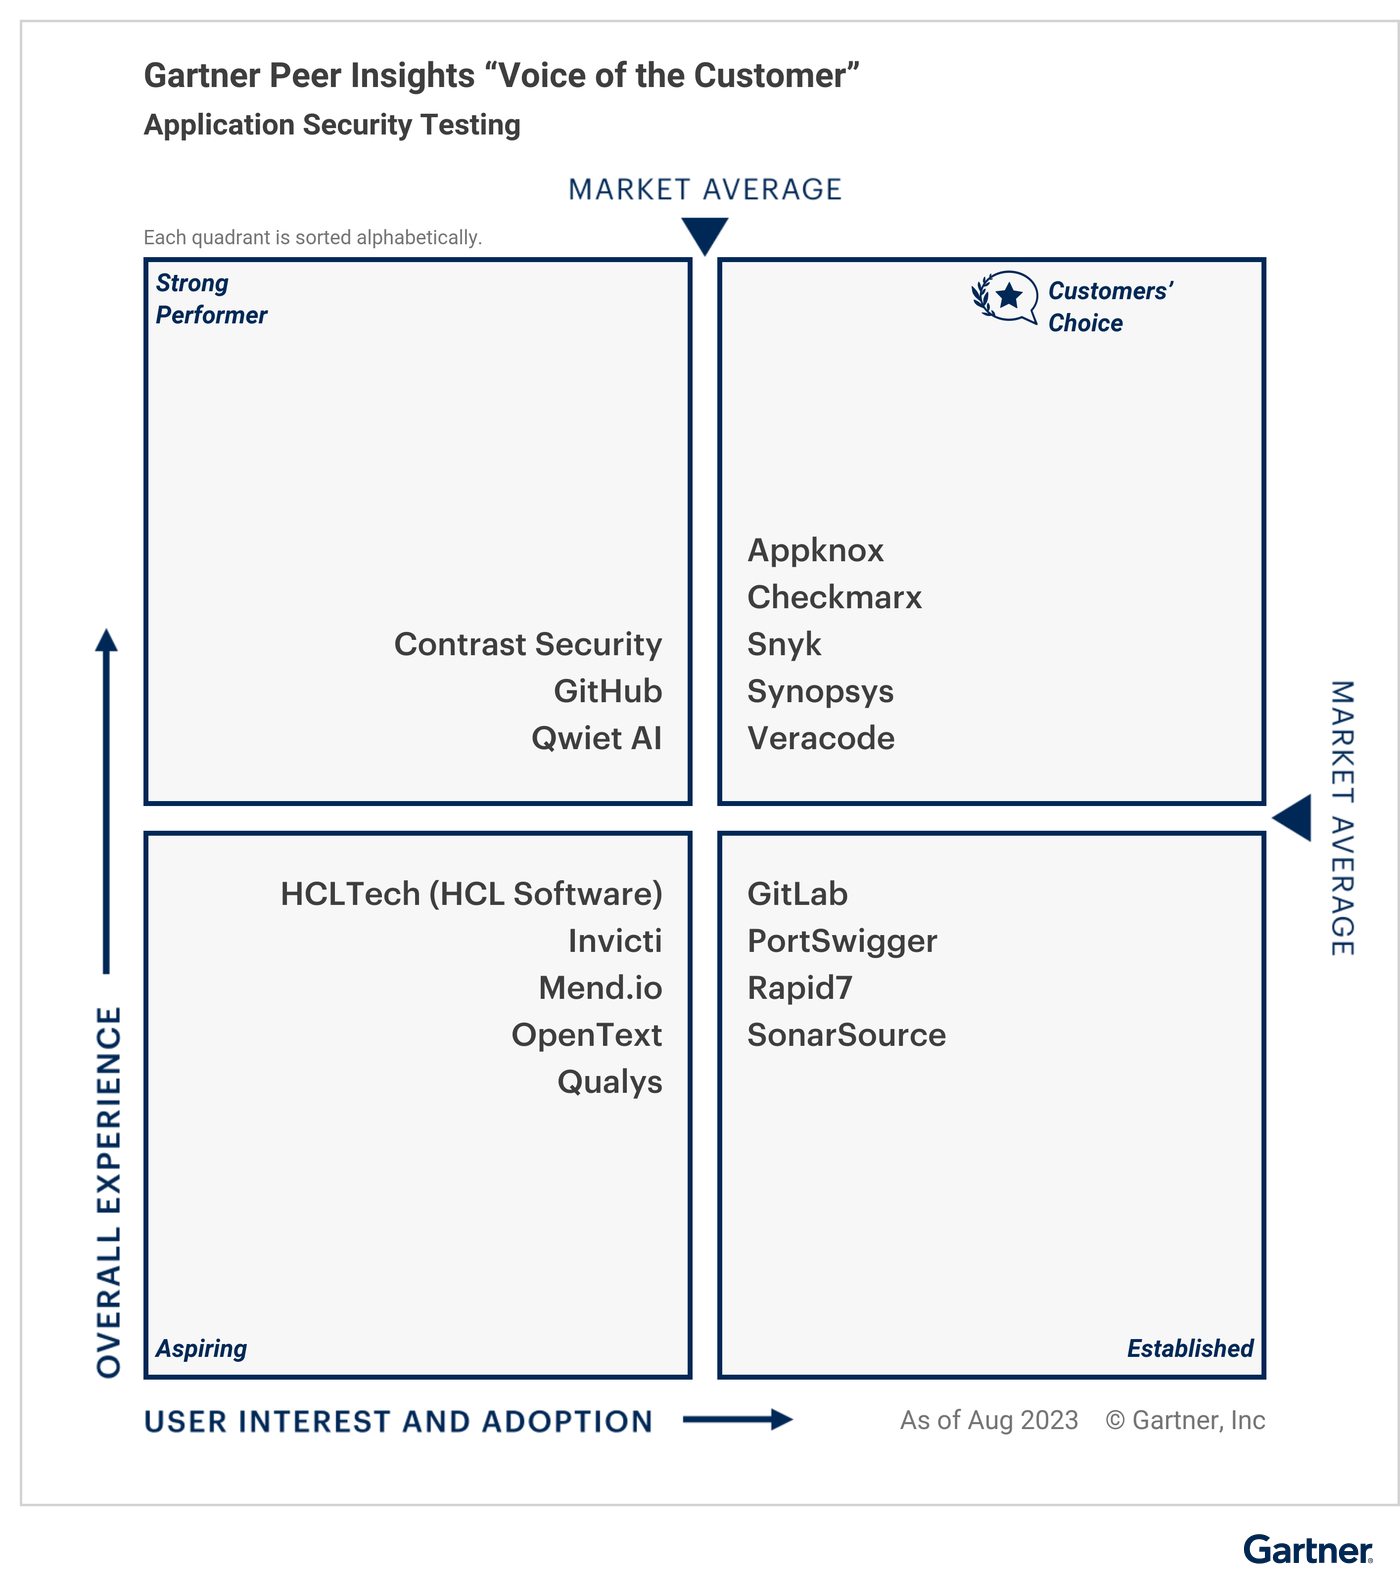 Figure_1_Voice_of_the_Customer_for_Application_Security_Testing (Appknox)